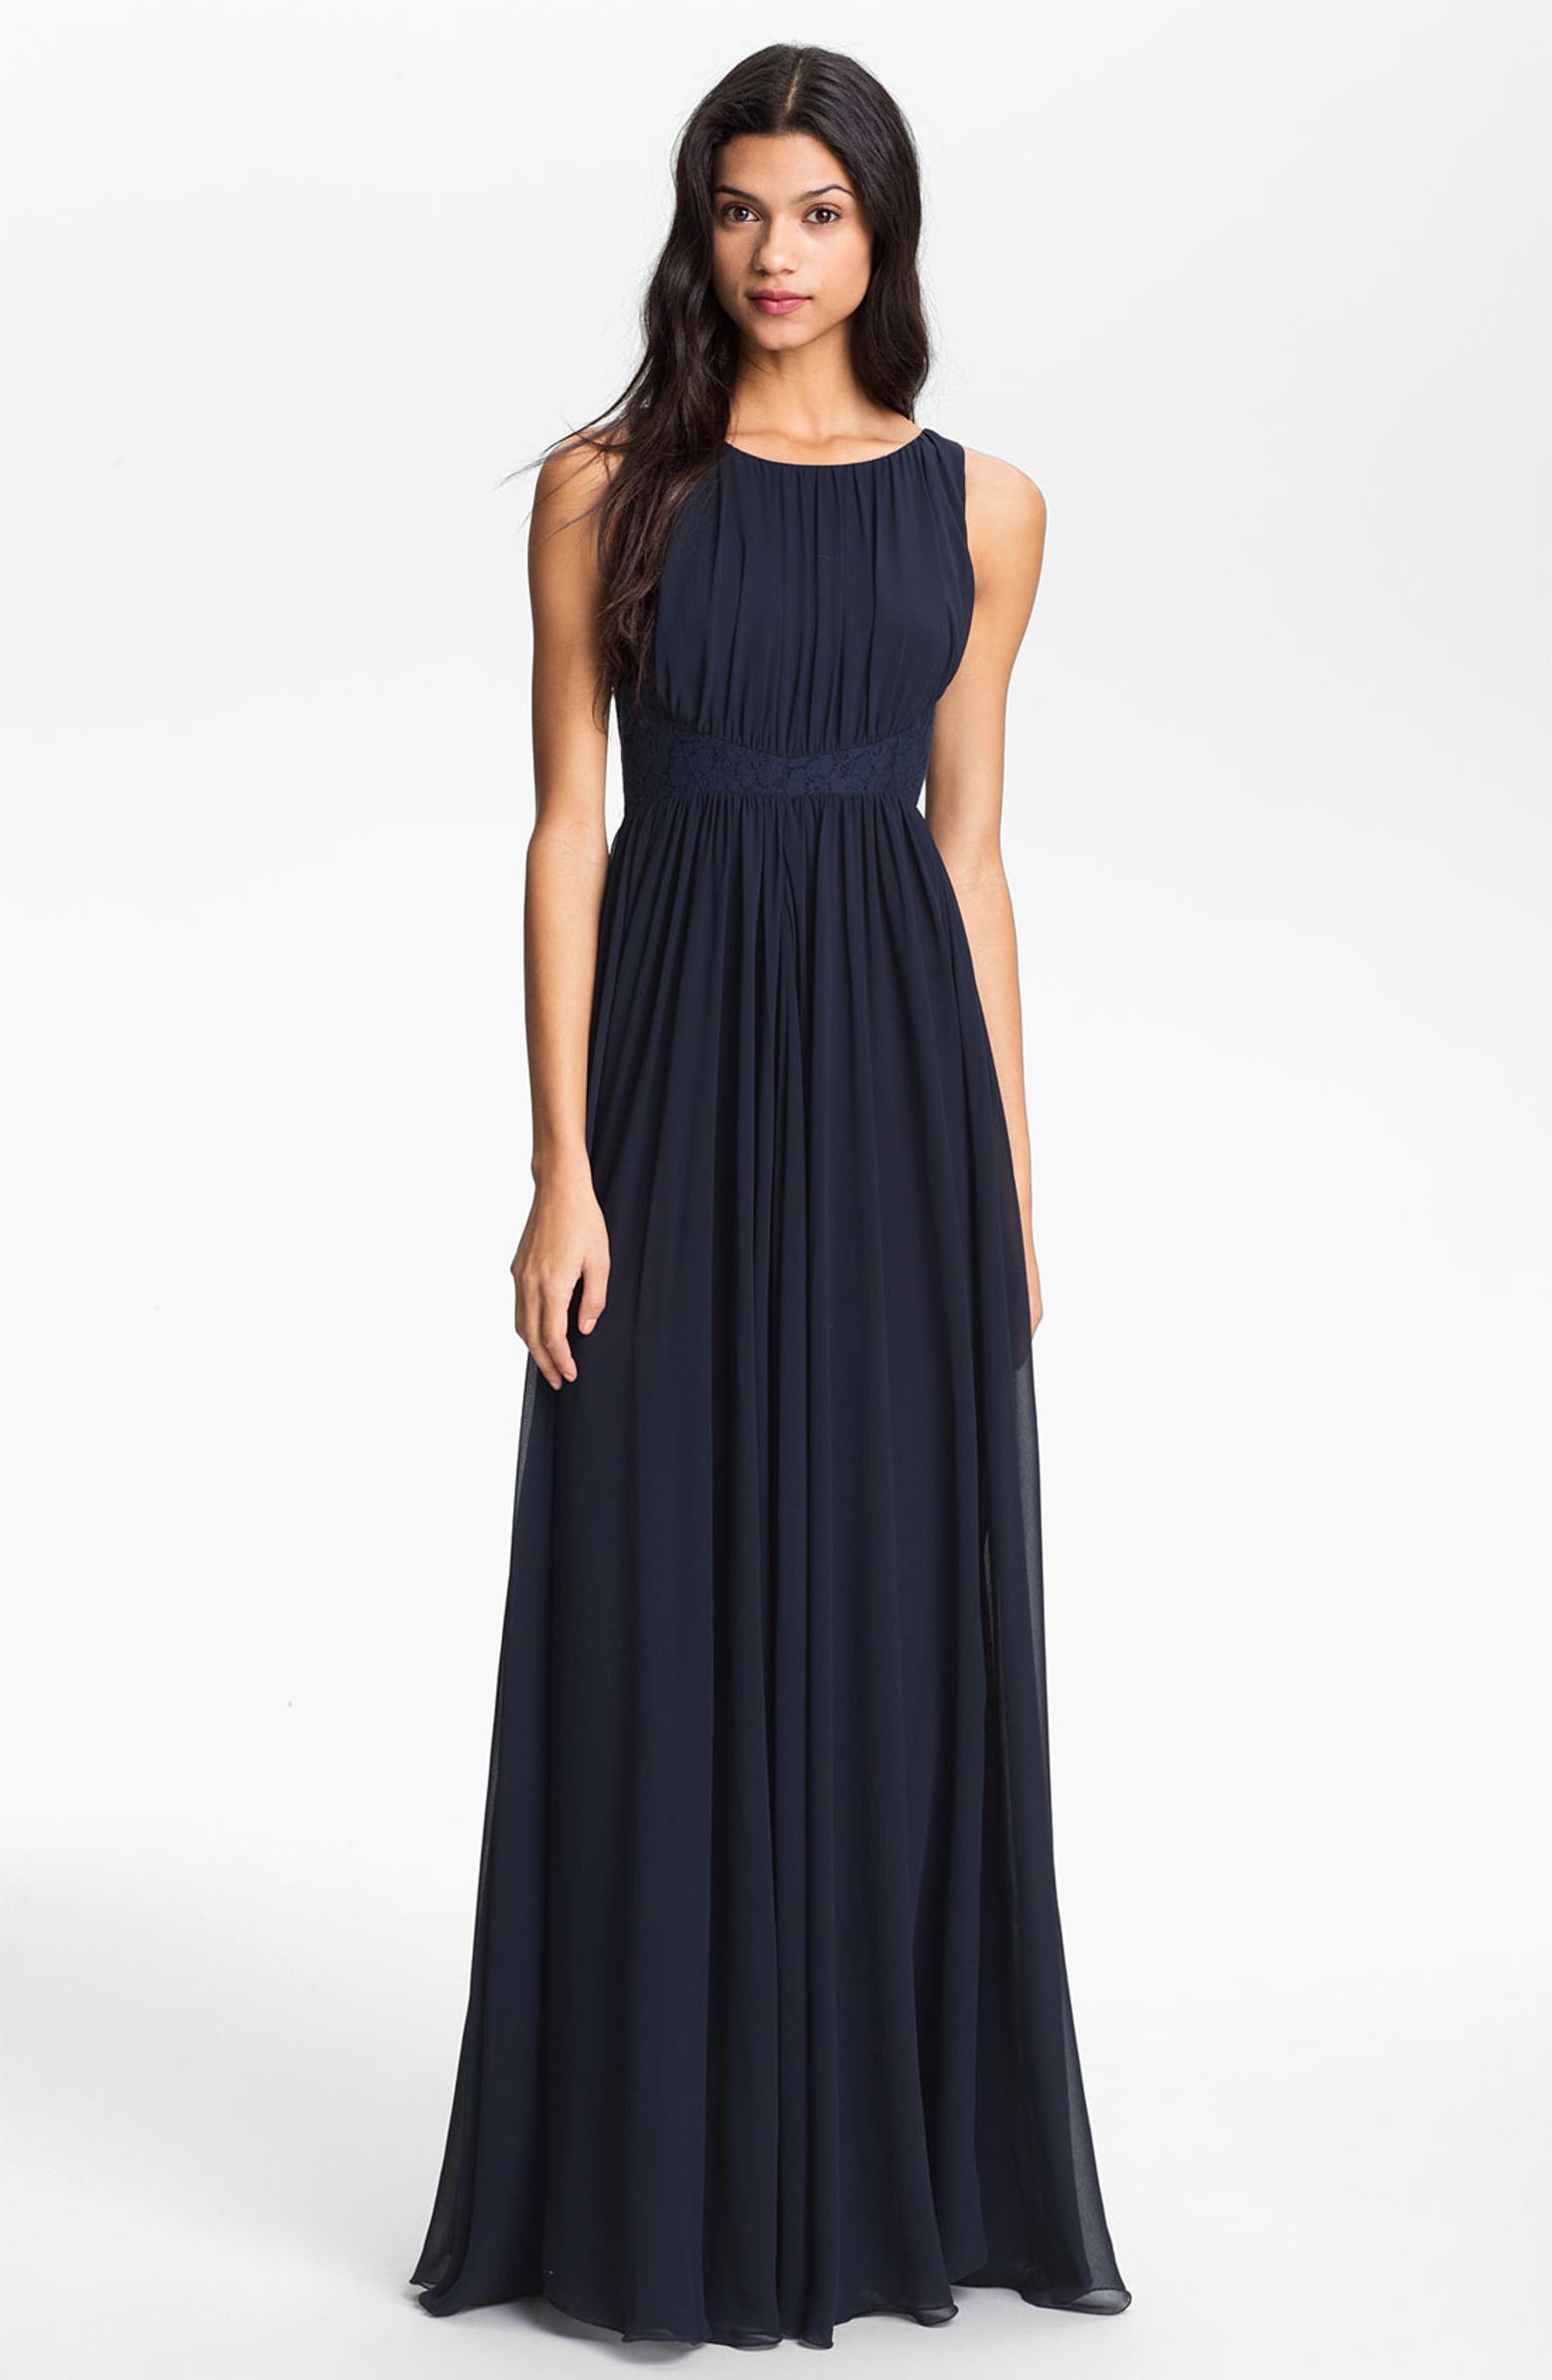 French Connection 'Summer Spell' Chiffon Maxi Dress | Nordstrom